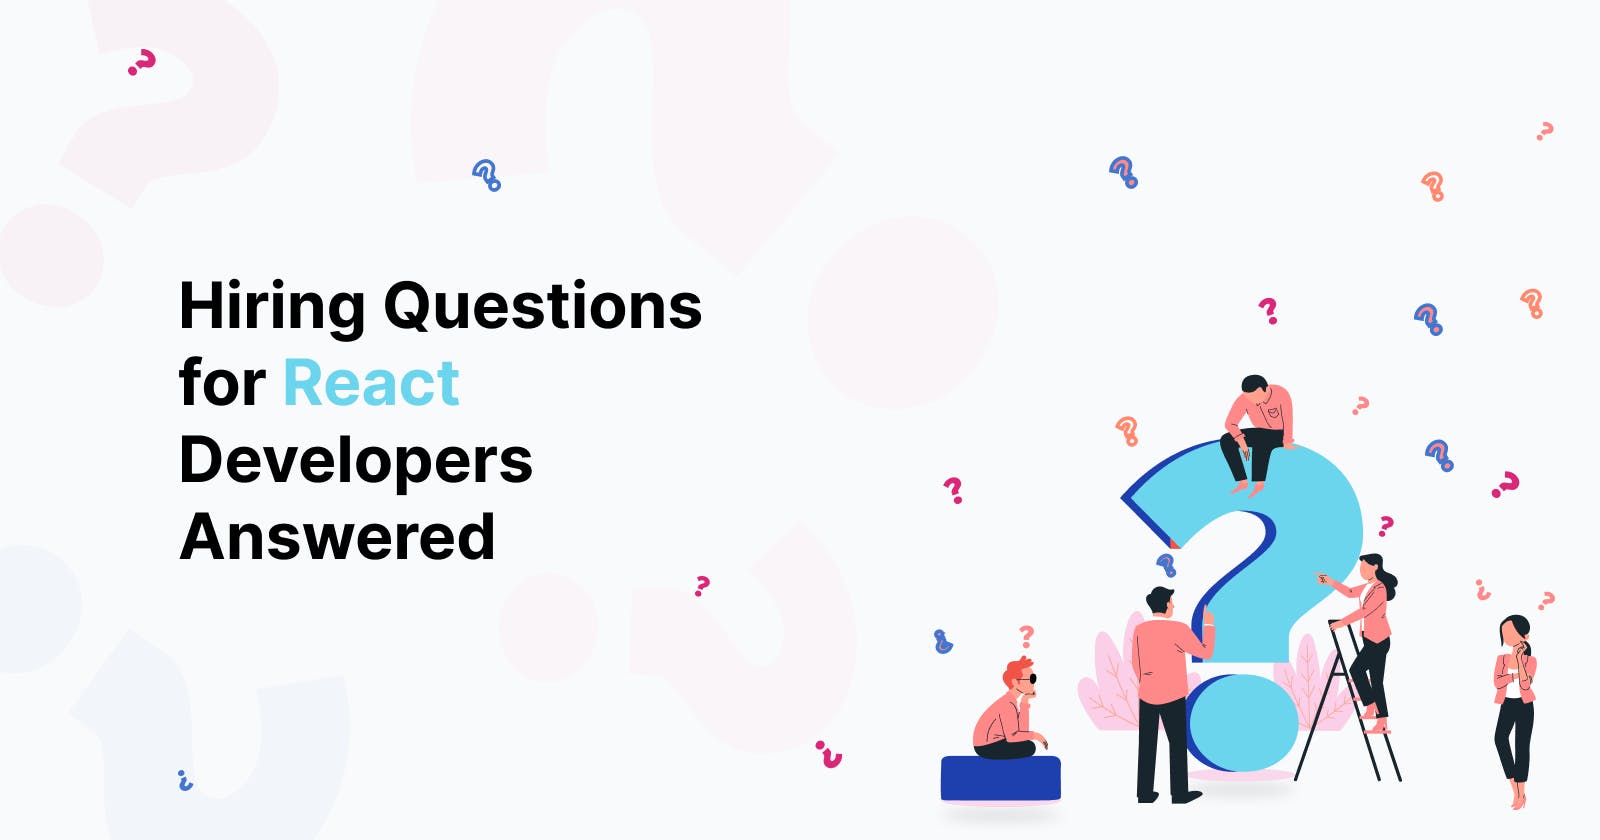 Hiring Questions for React Developers Answered